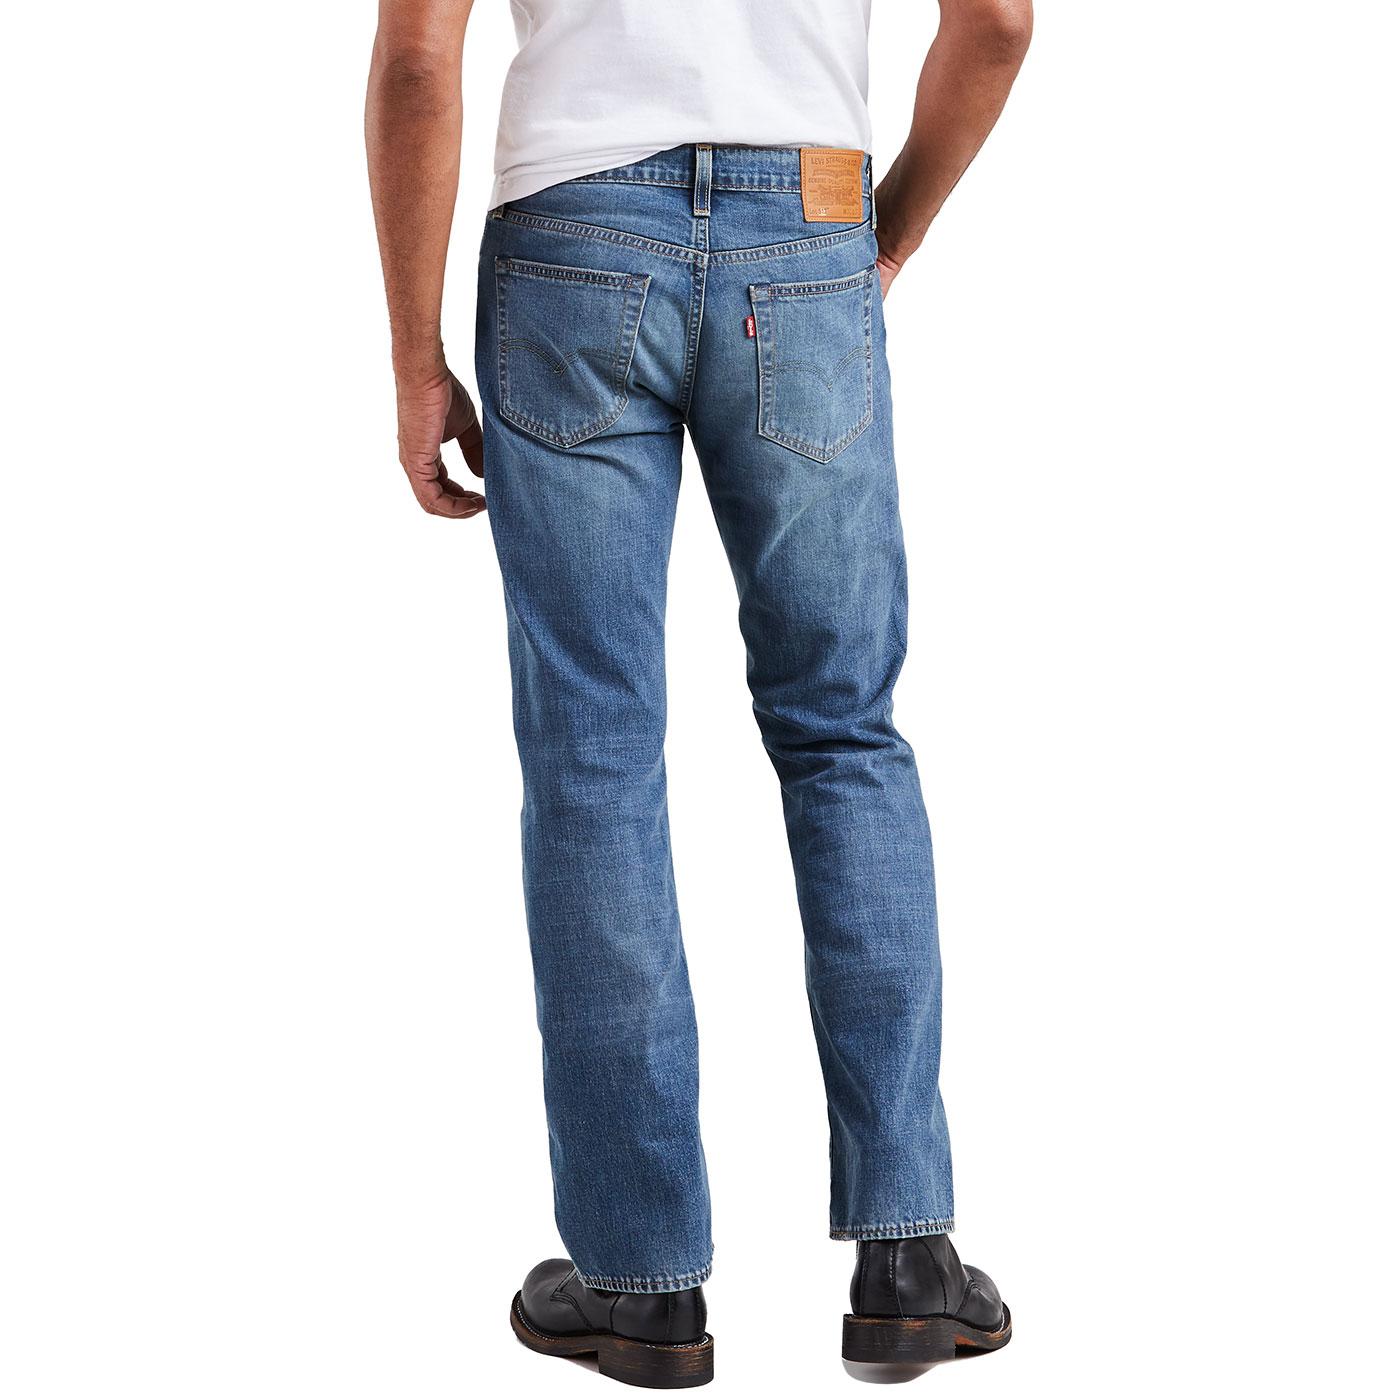 jeans similar to levis 527